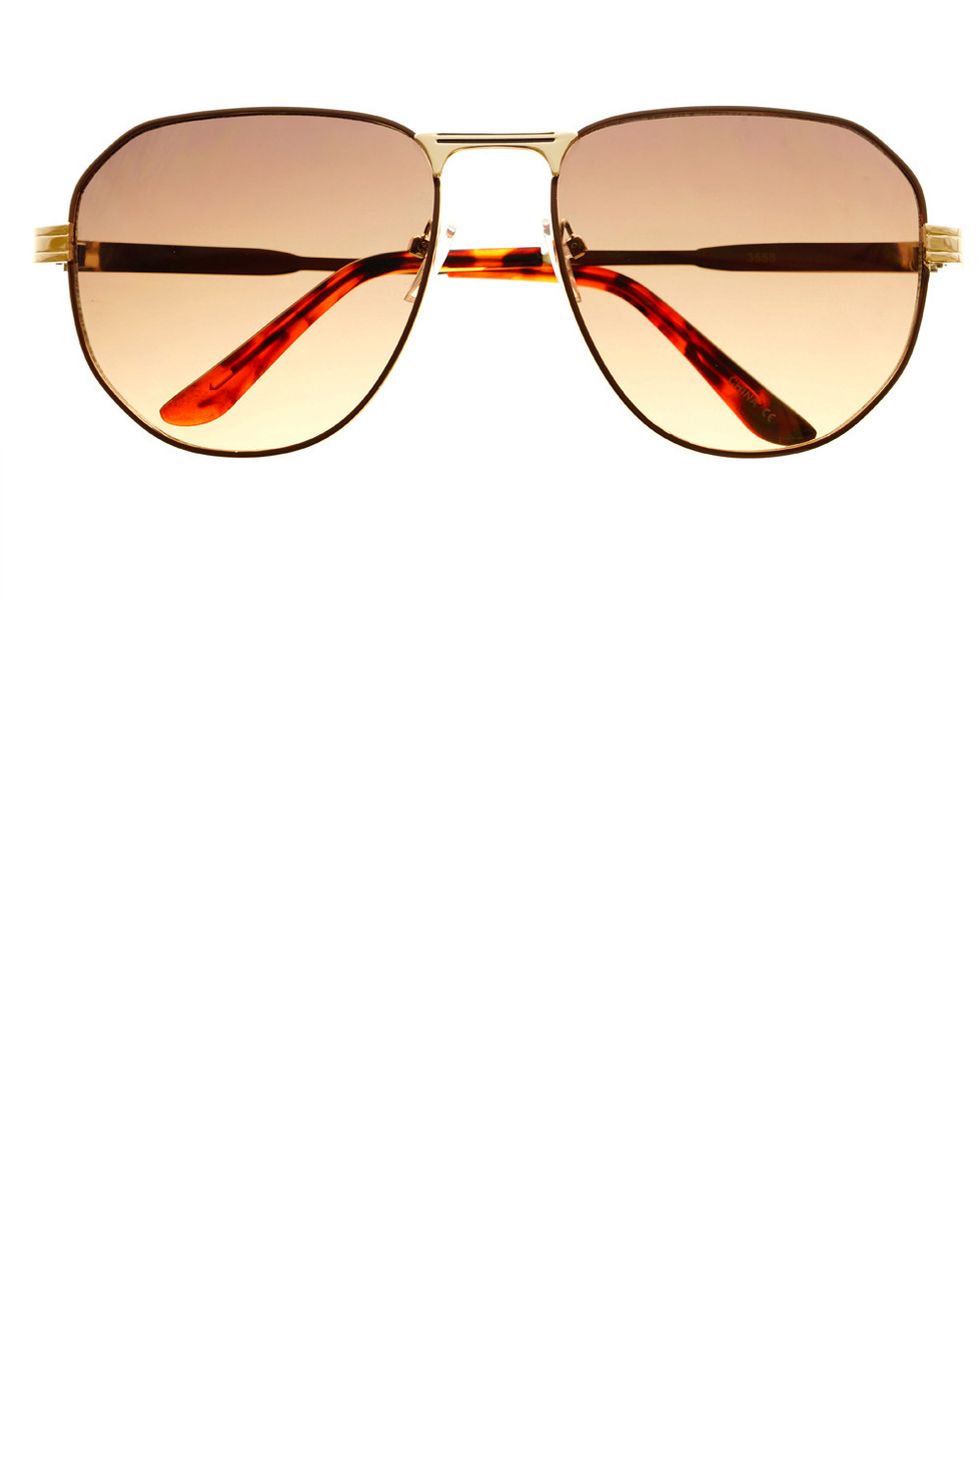 <p><strong>Freyrs</strong> sunglasses, $10, <a href="http://freyrs.com/collections/womens-sunglasses/products/designer-style-mens-womens-square-metal-aviator-sunglasses-a1330-1" target="_blank">freyrs.com</a>. </p>